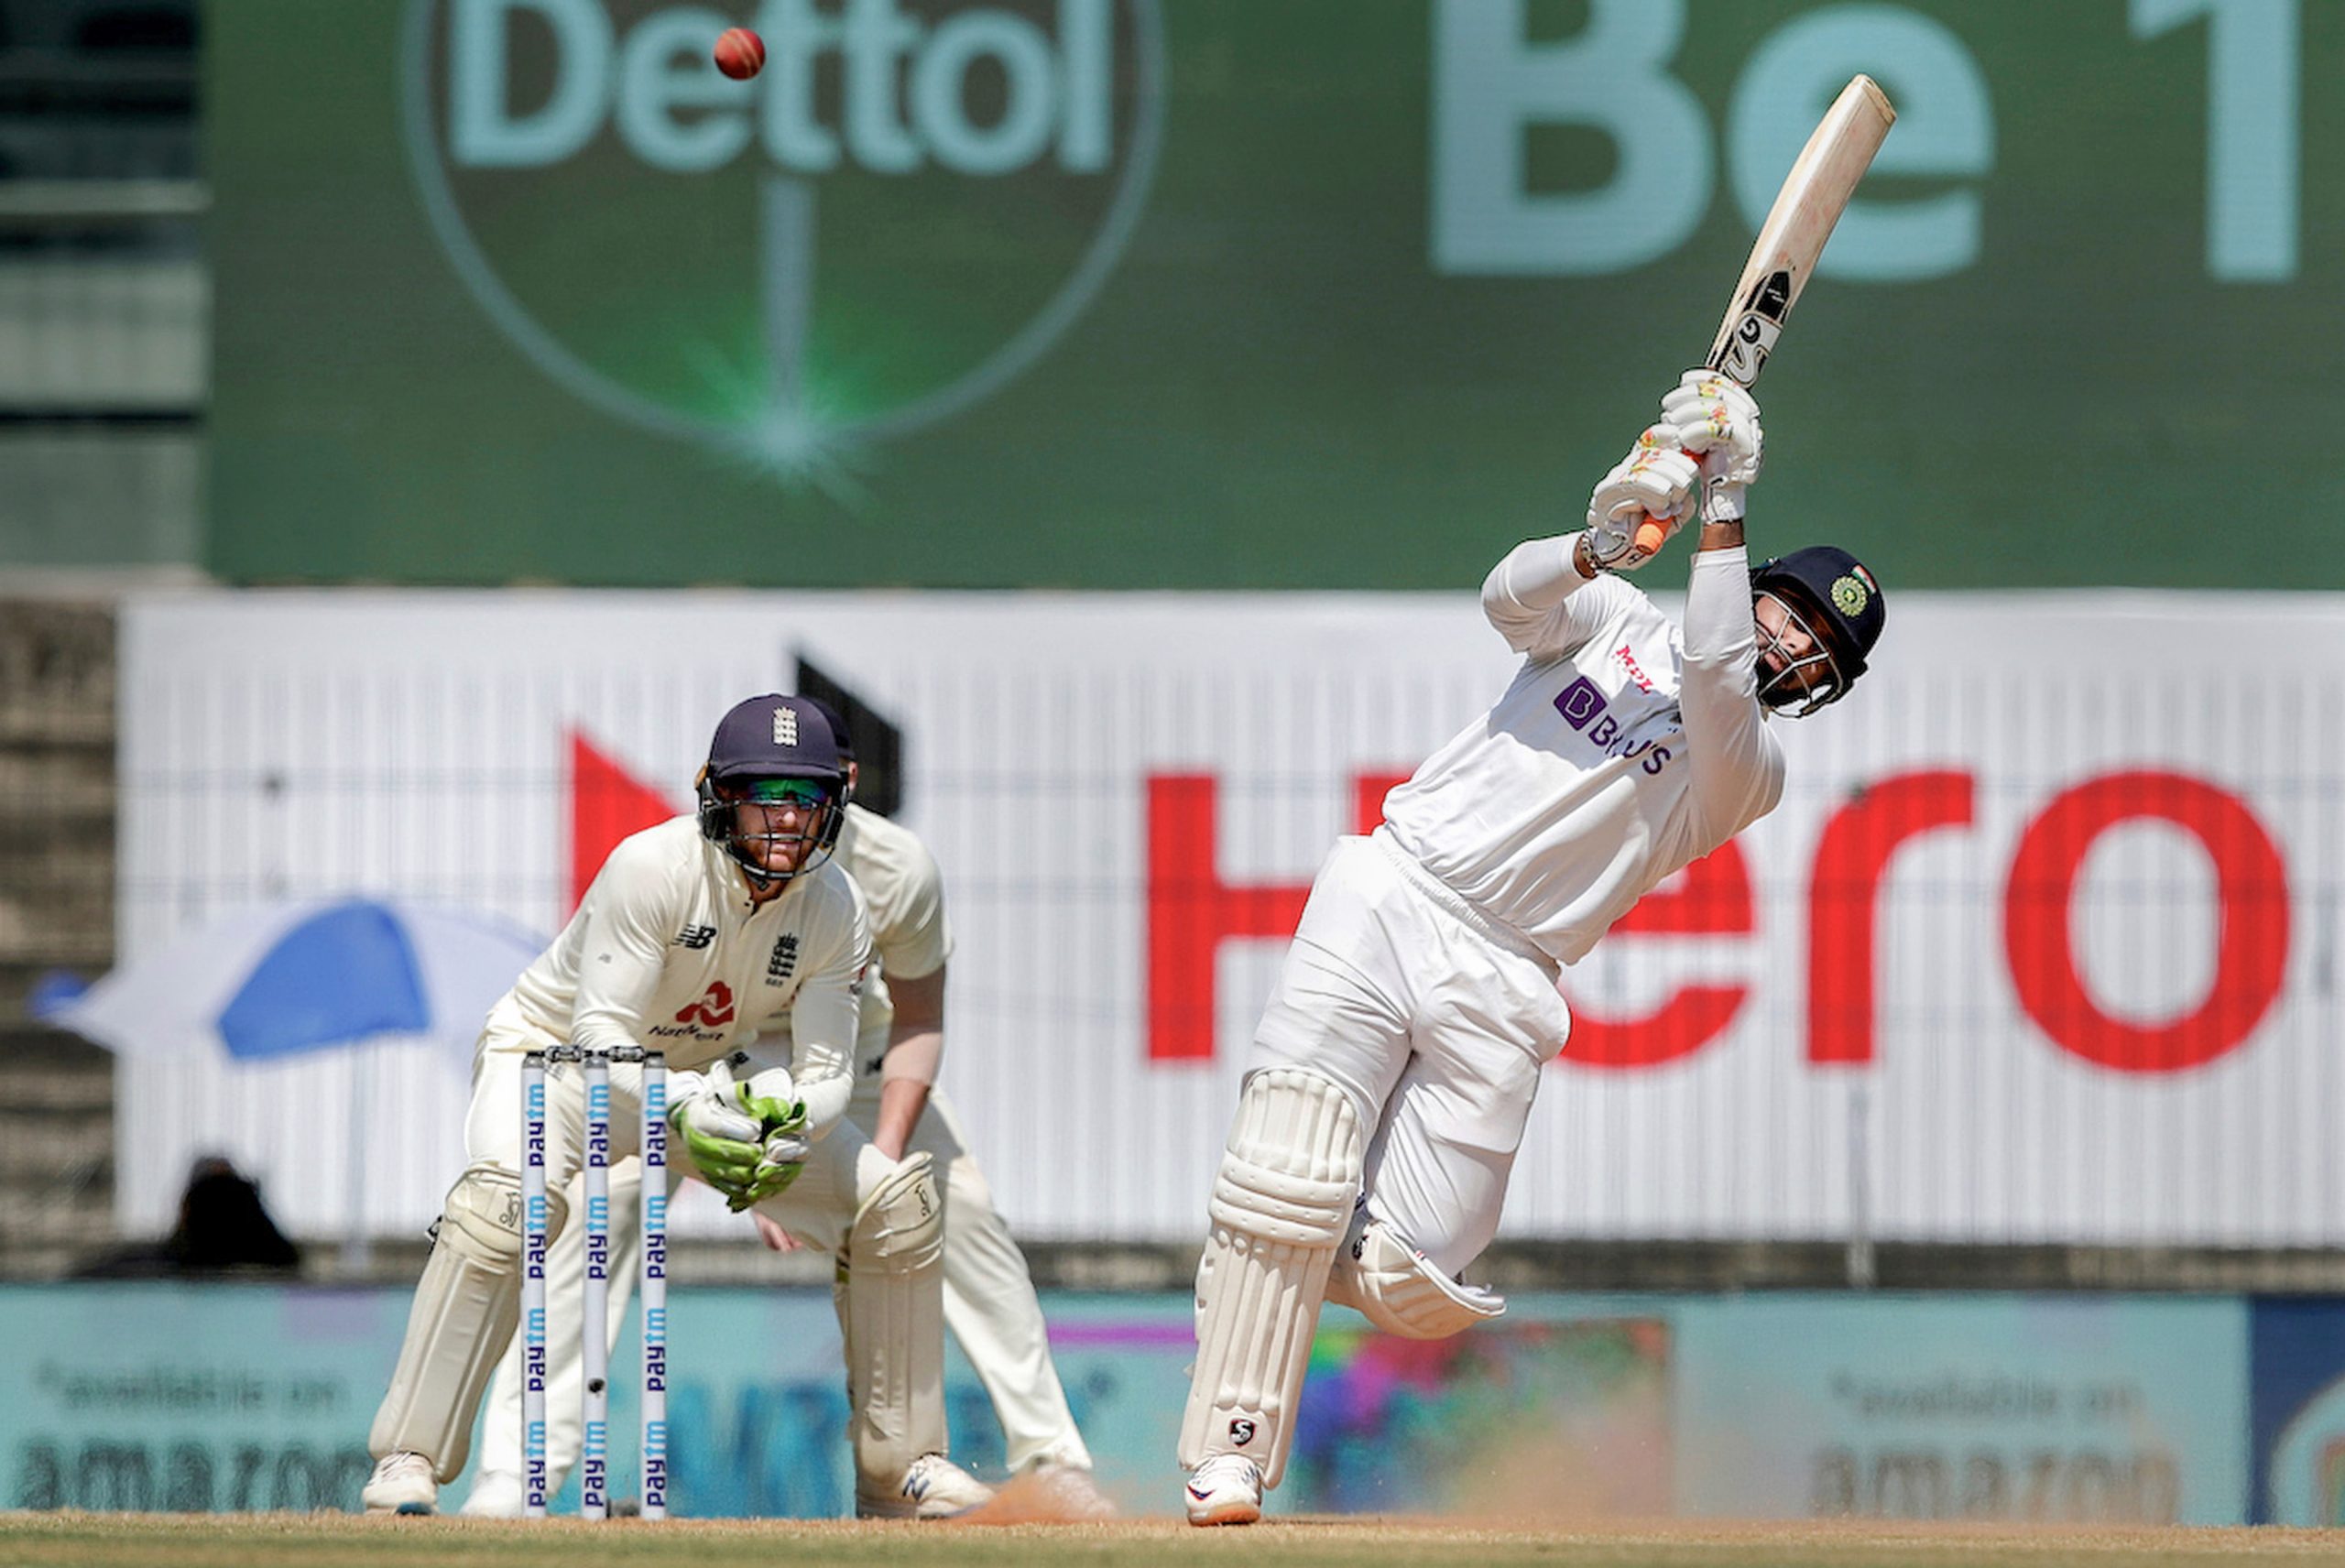 Ind vs Eng 1st Test Day 3 Highlights: India trail England by 321 runs at stumps